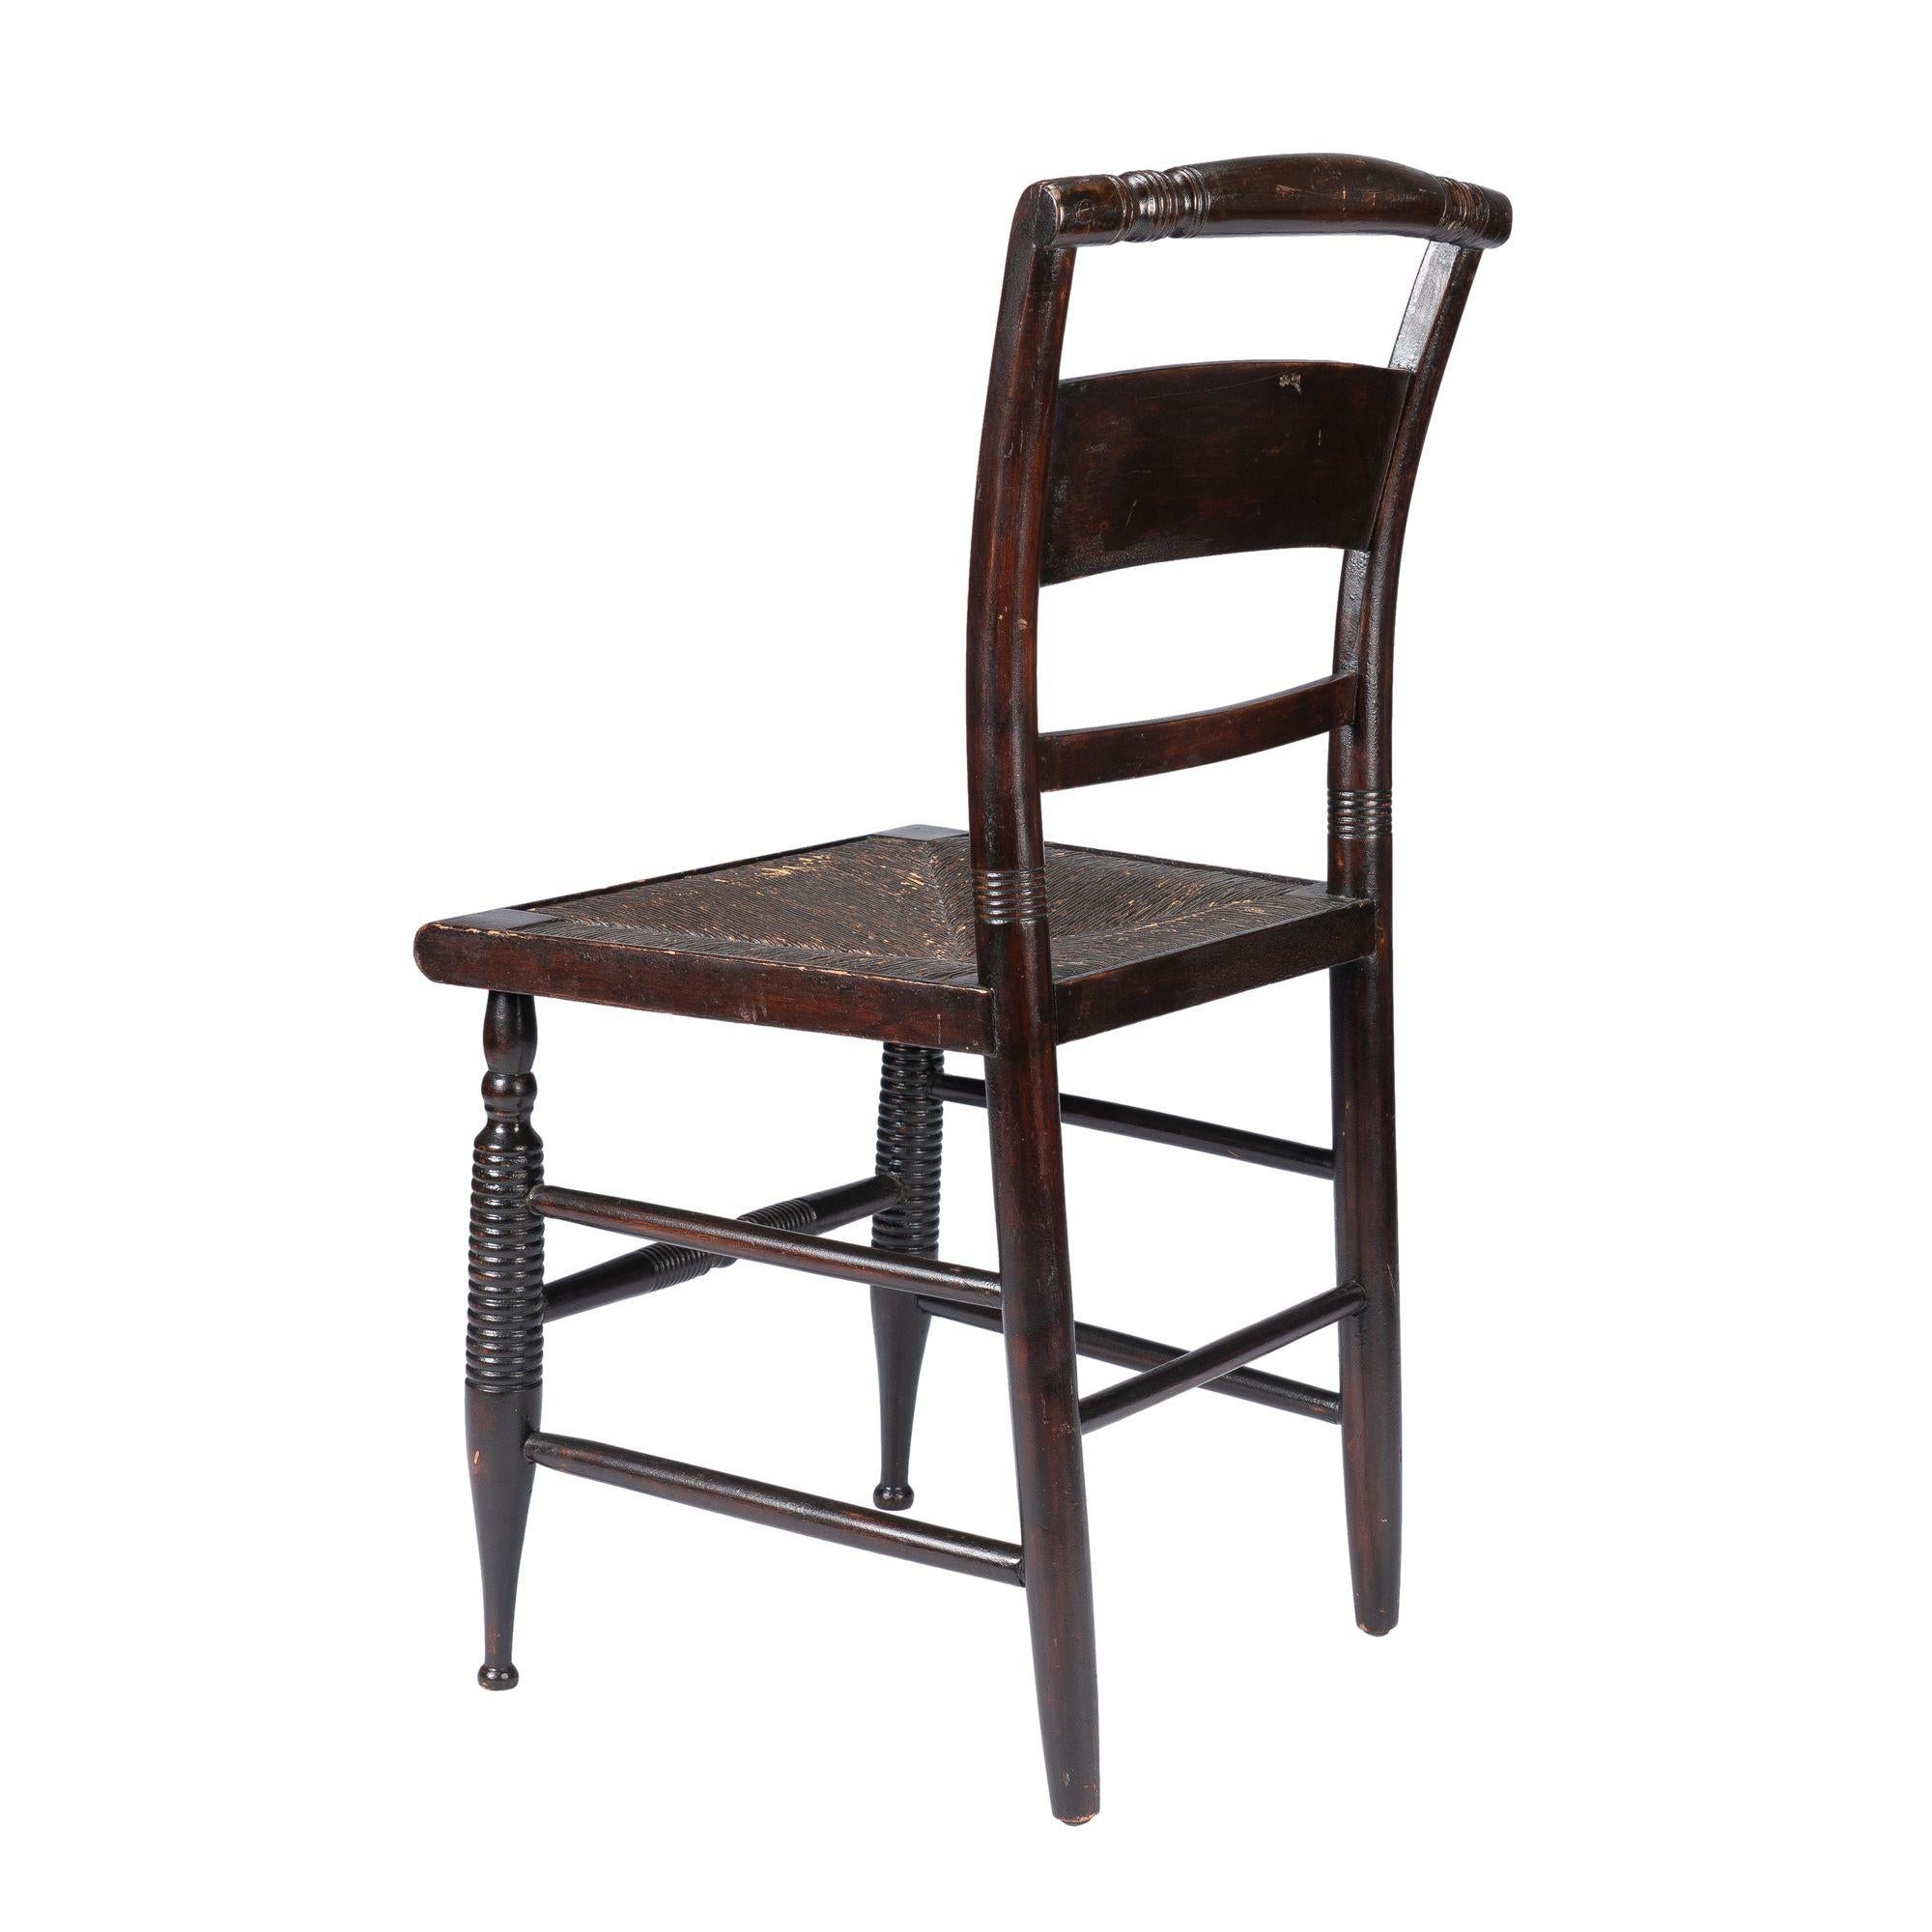 Connecticut Valley Hitchcock rush seat side chair, 1820 In Good Condition For Sale In Kenilworth, IL